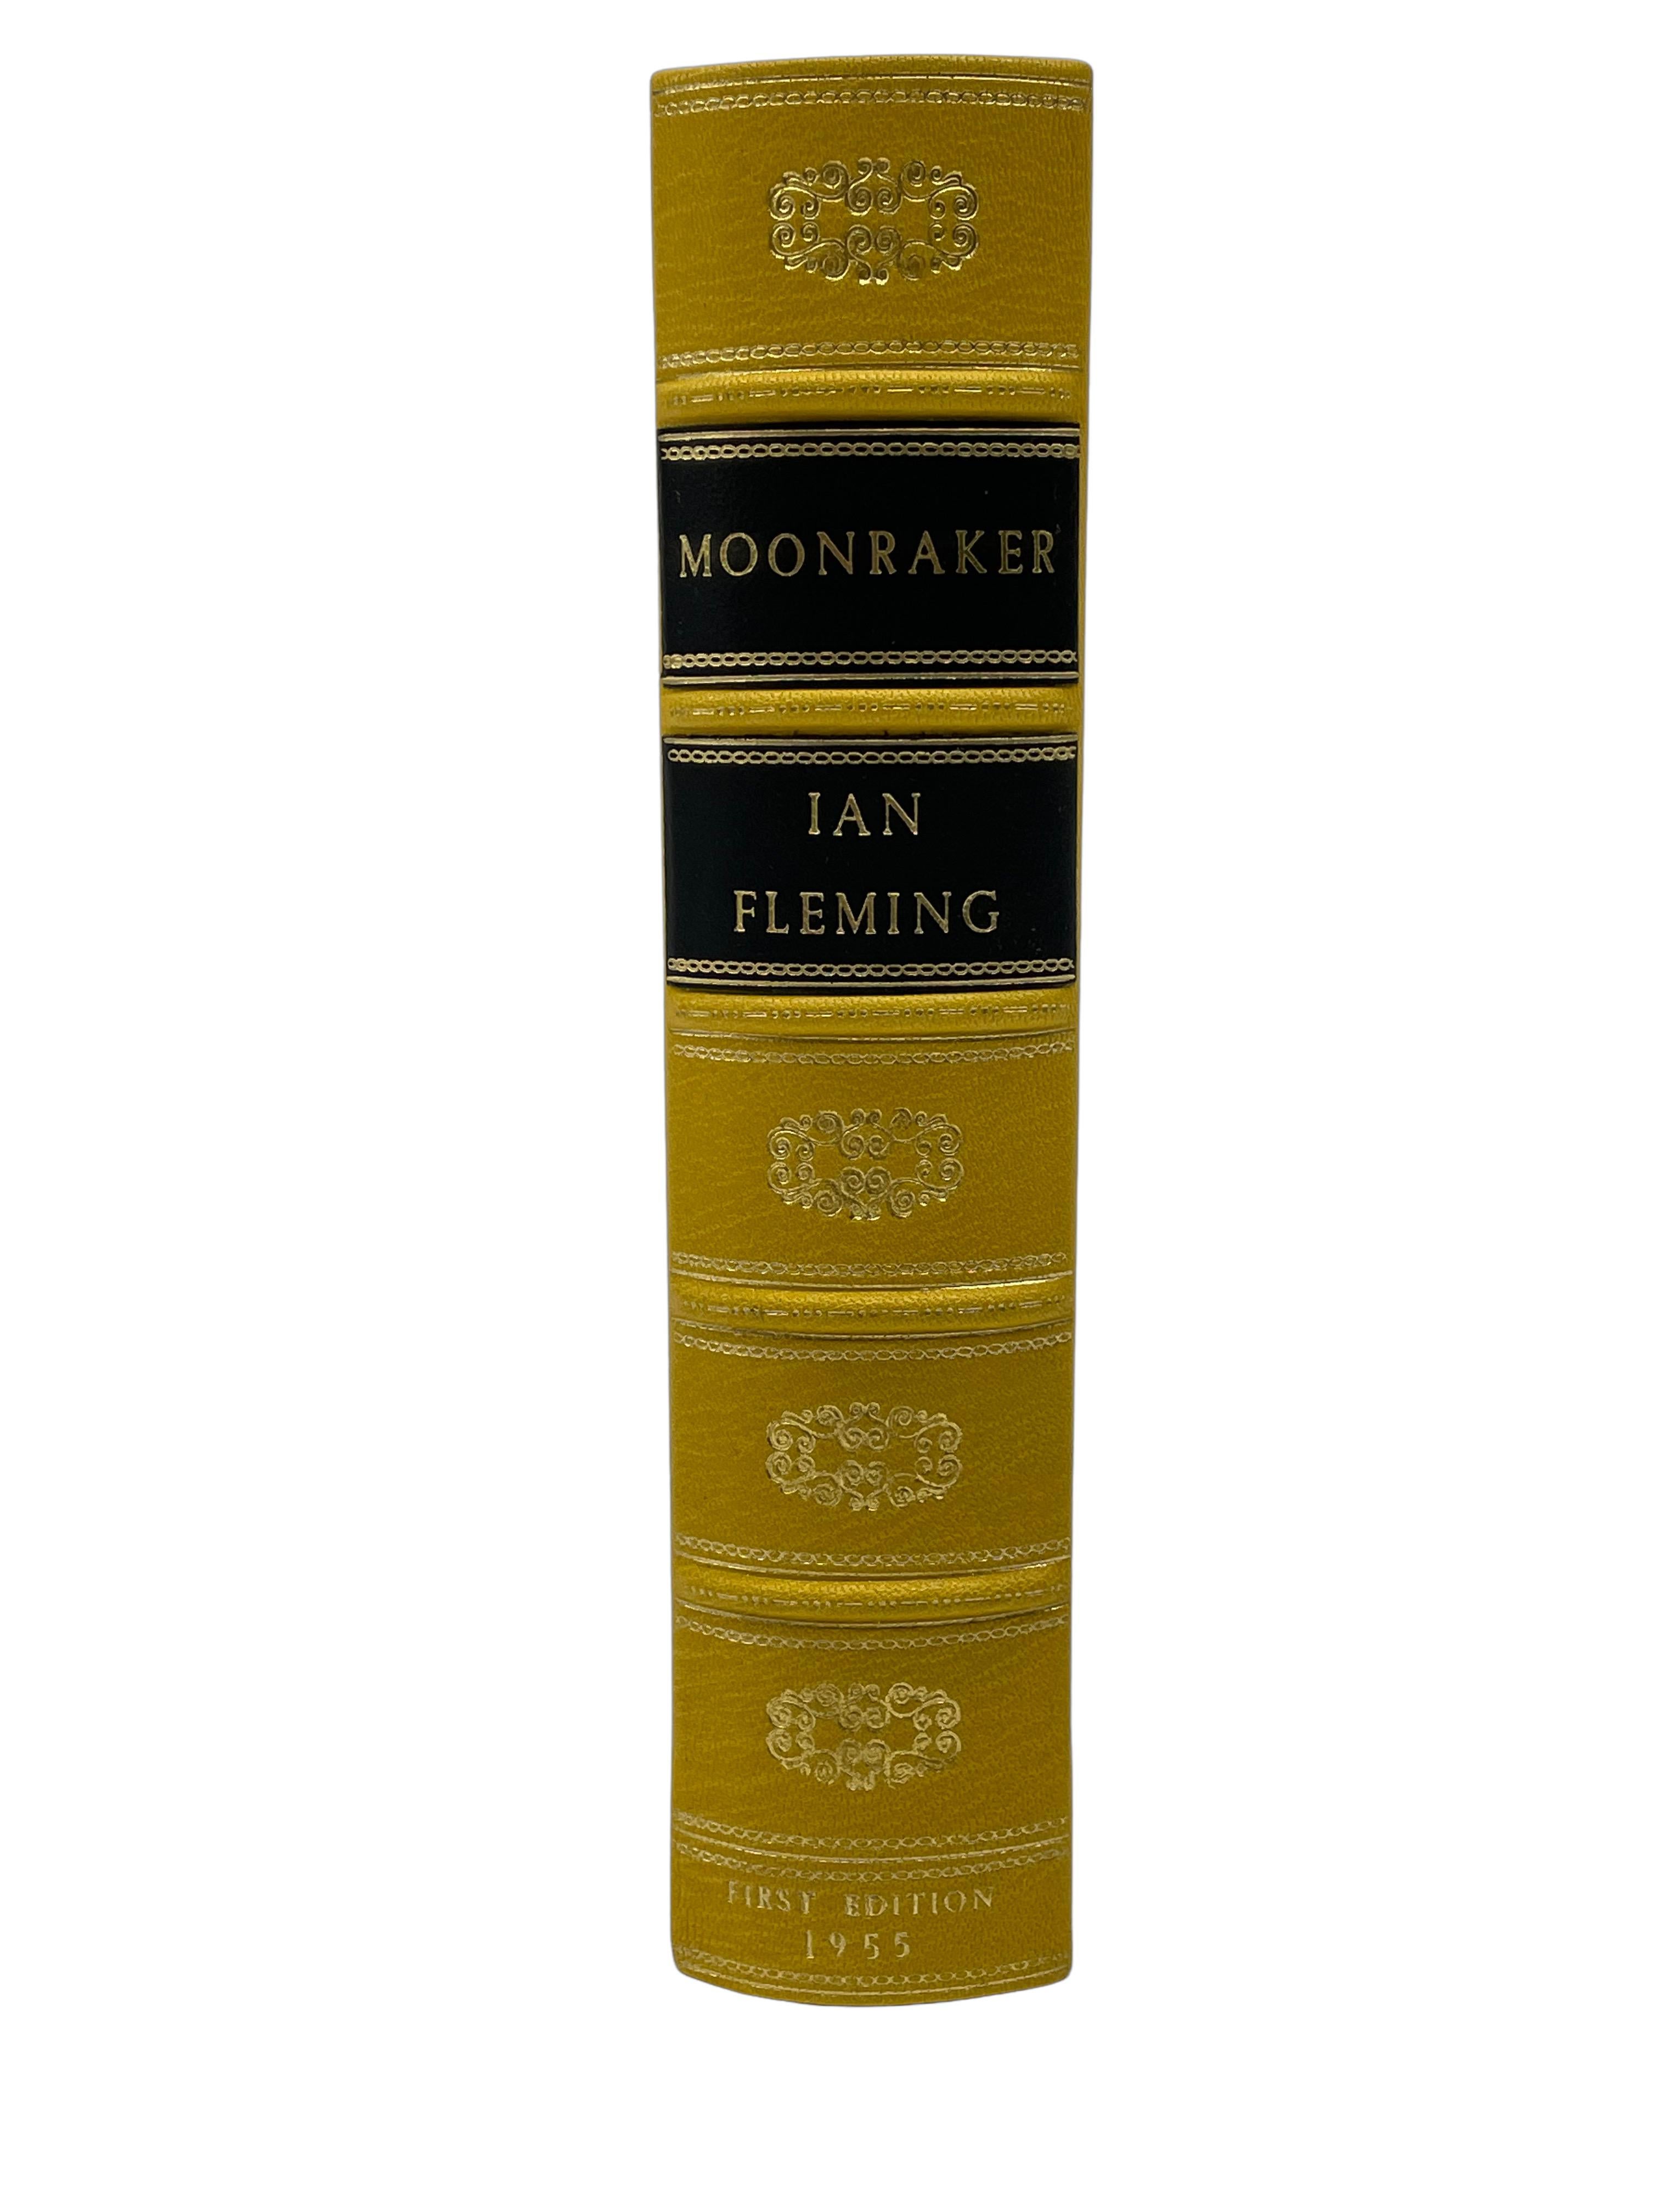 English Moonraker by Ian Fleming, First UK Edition, Second State, 1955